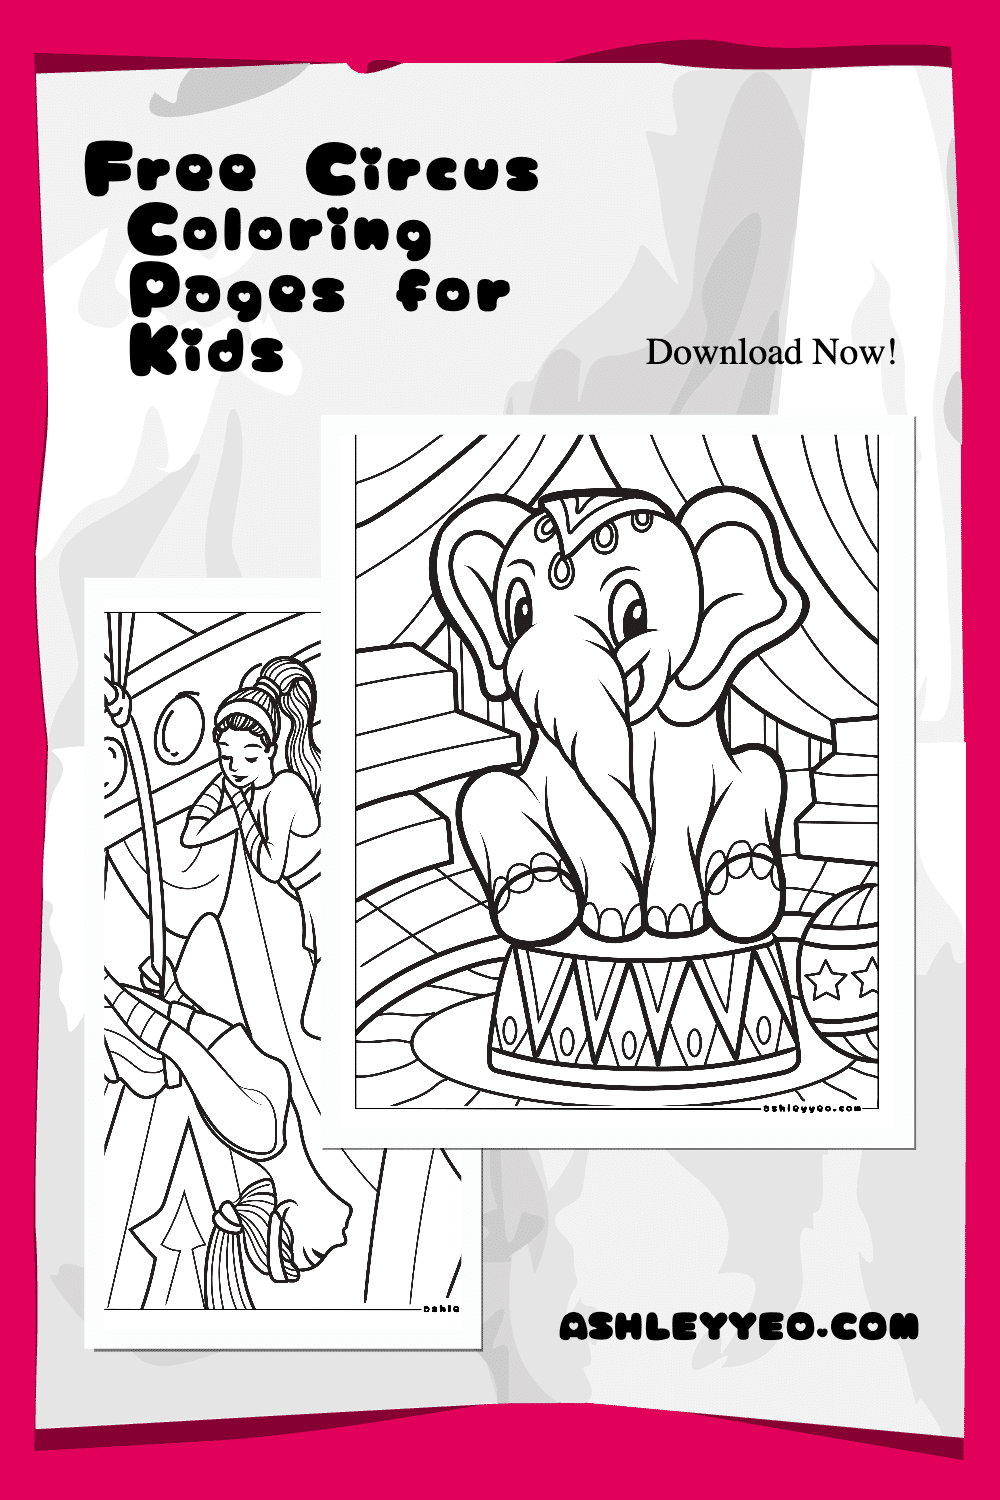 Free circus coloring pages for kids